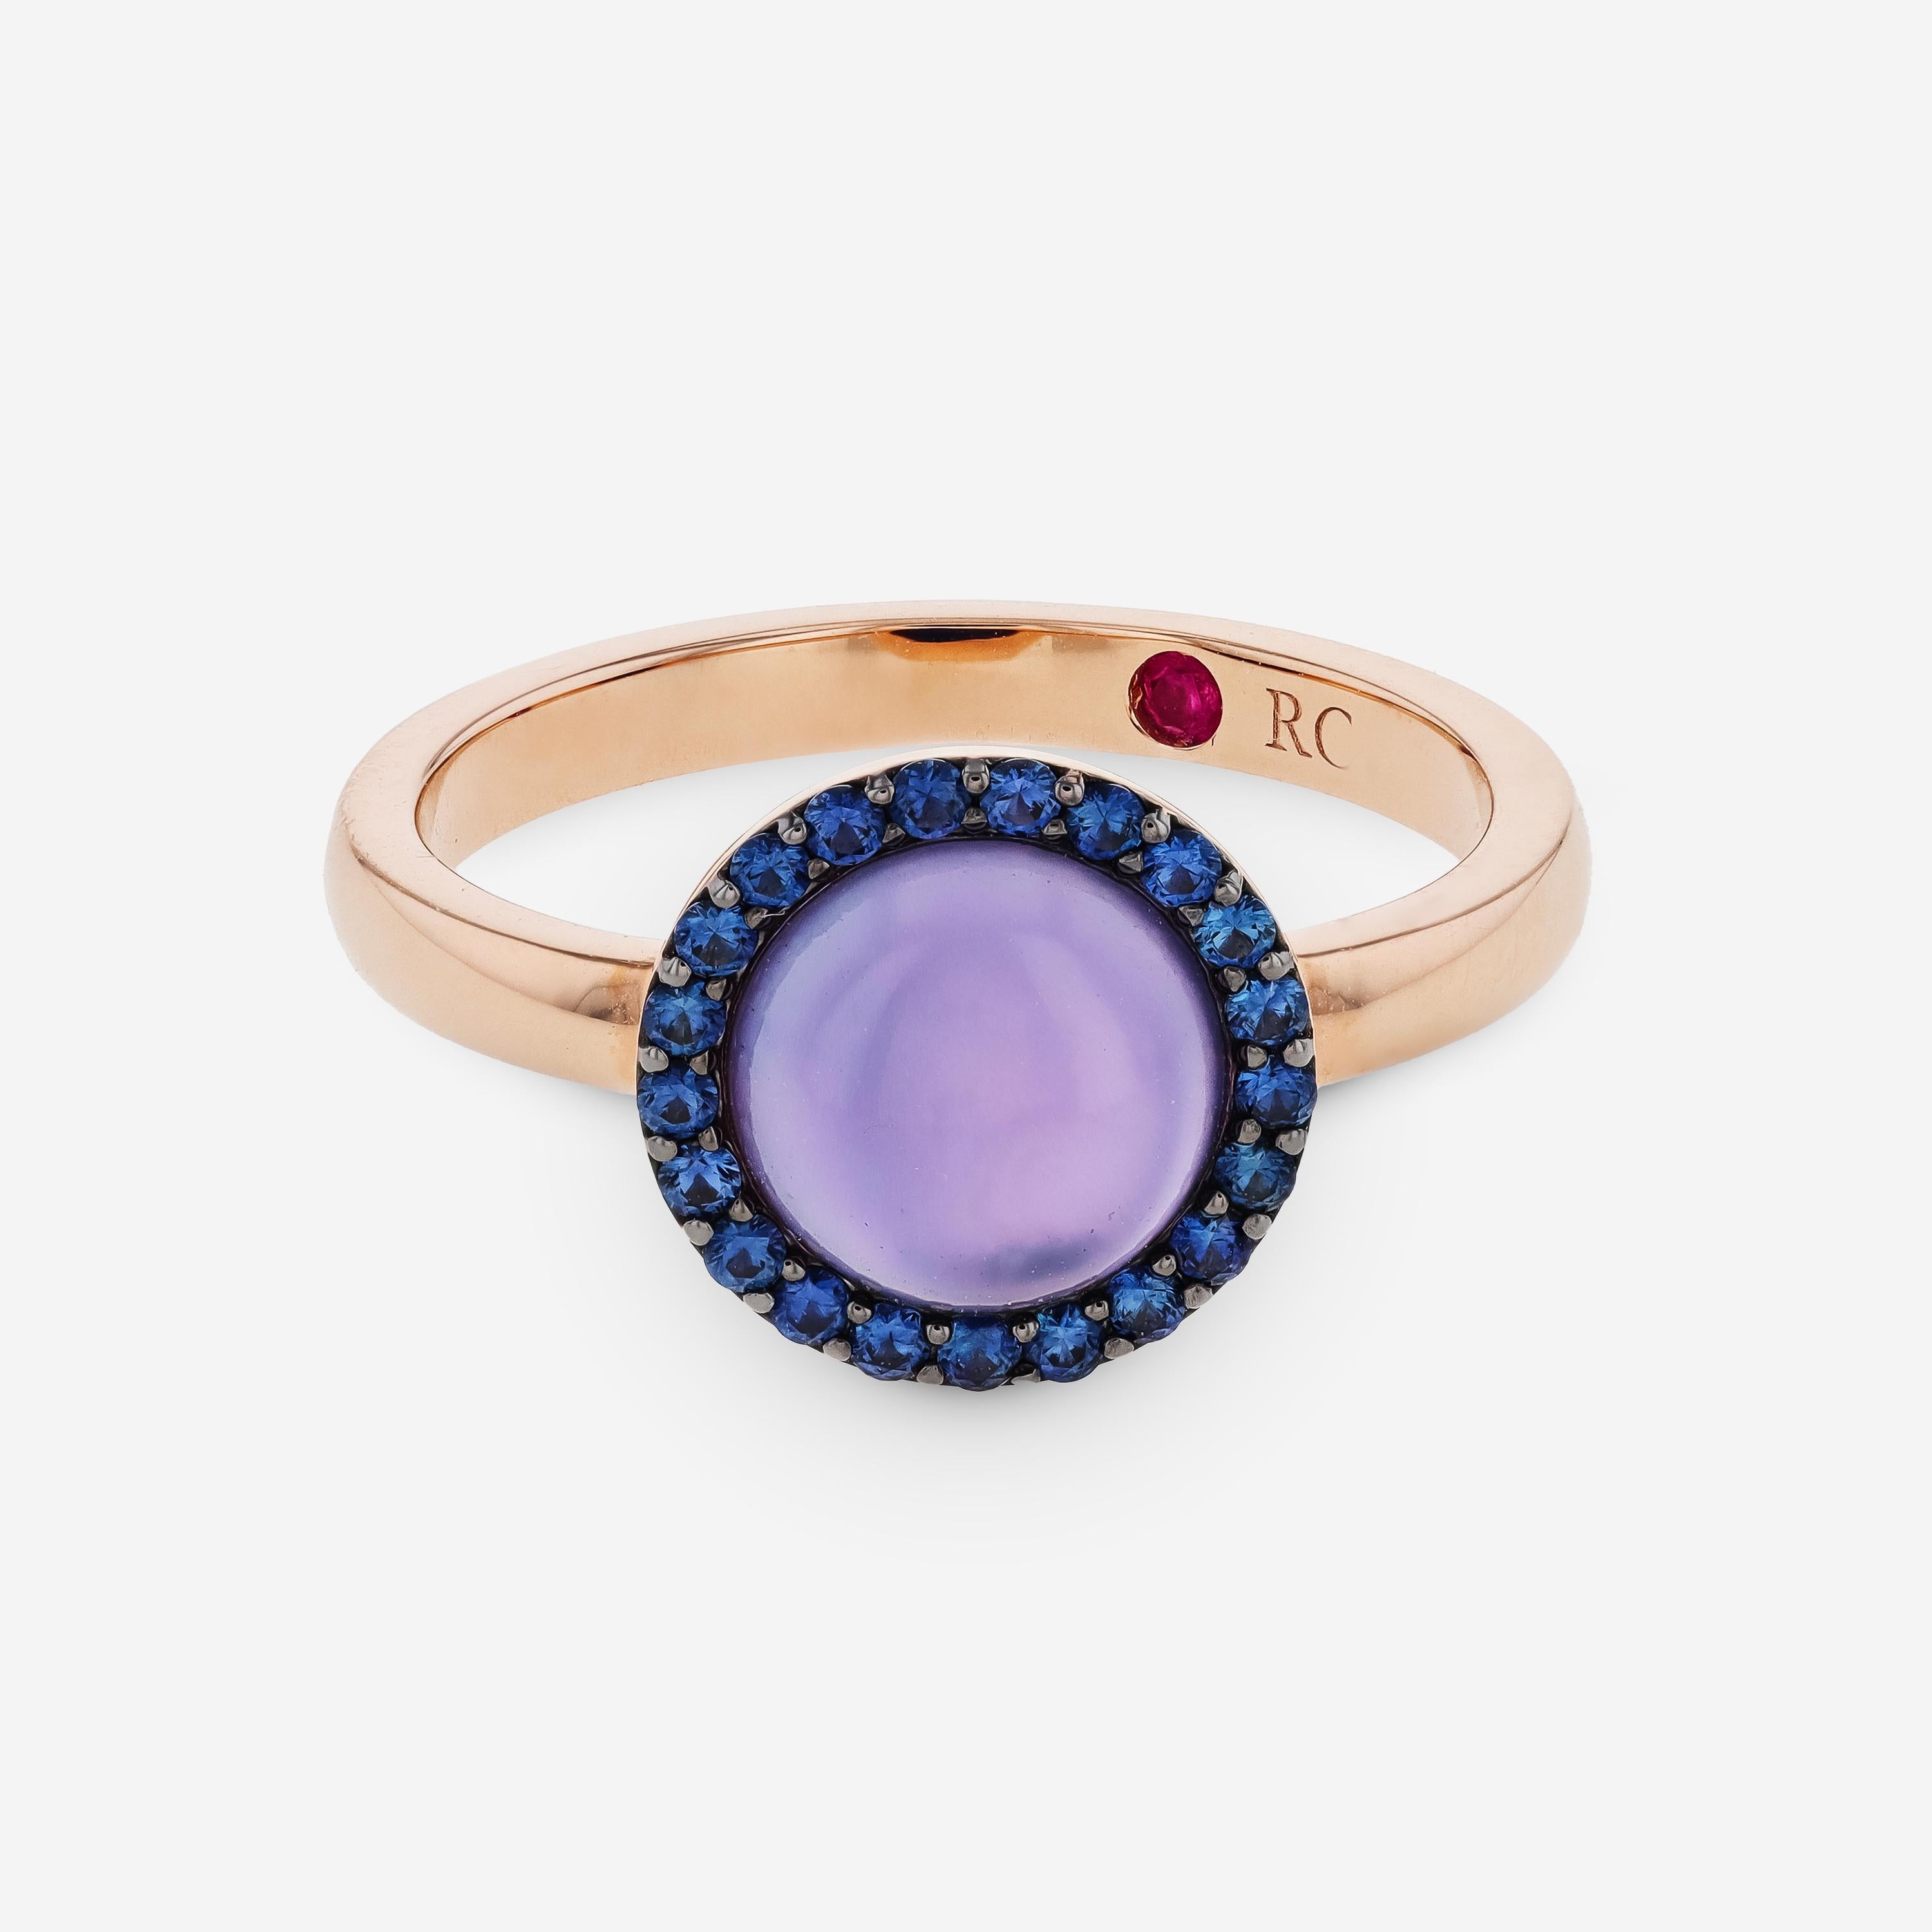 Roberto Coin 18K rose gold statement ring features 0.17ct. tw. round blue sapphire glittering with a 1.85ct. tw. blue agate center. The ring size is 6.5 (53.1). The decoration size is 3/8